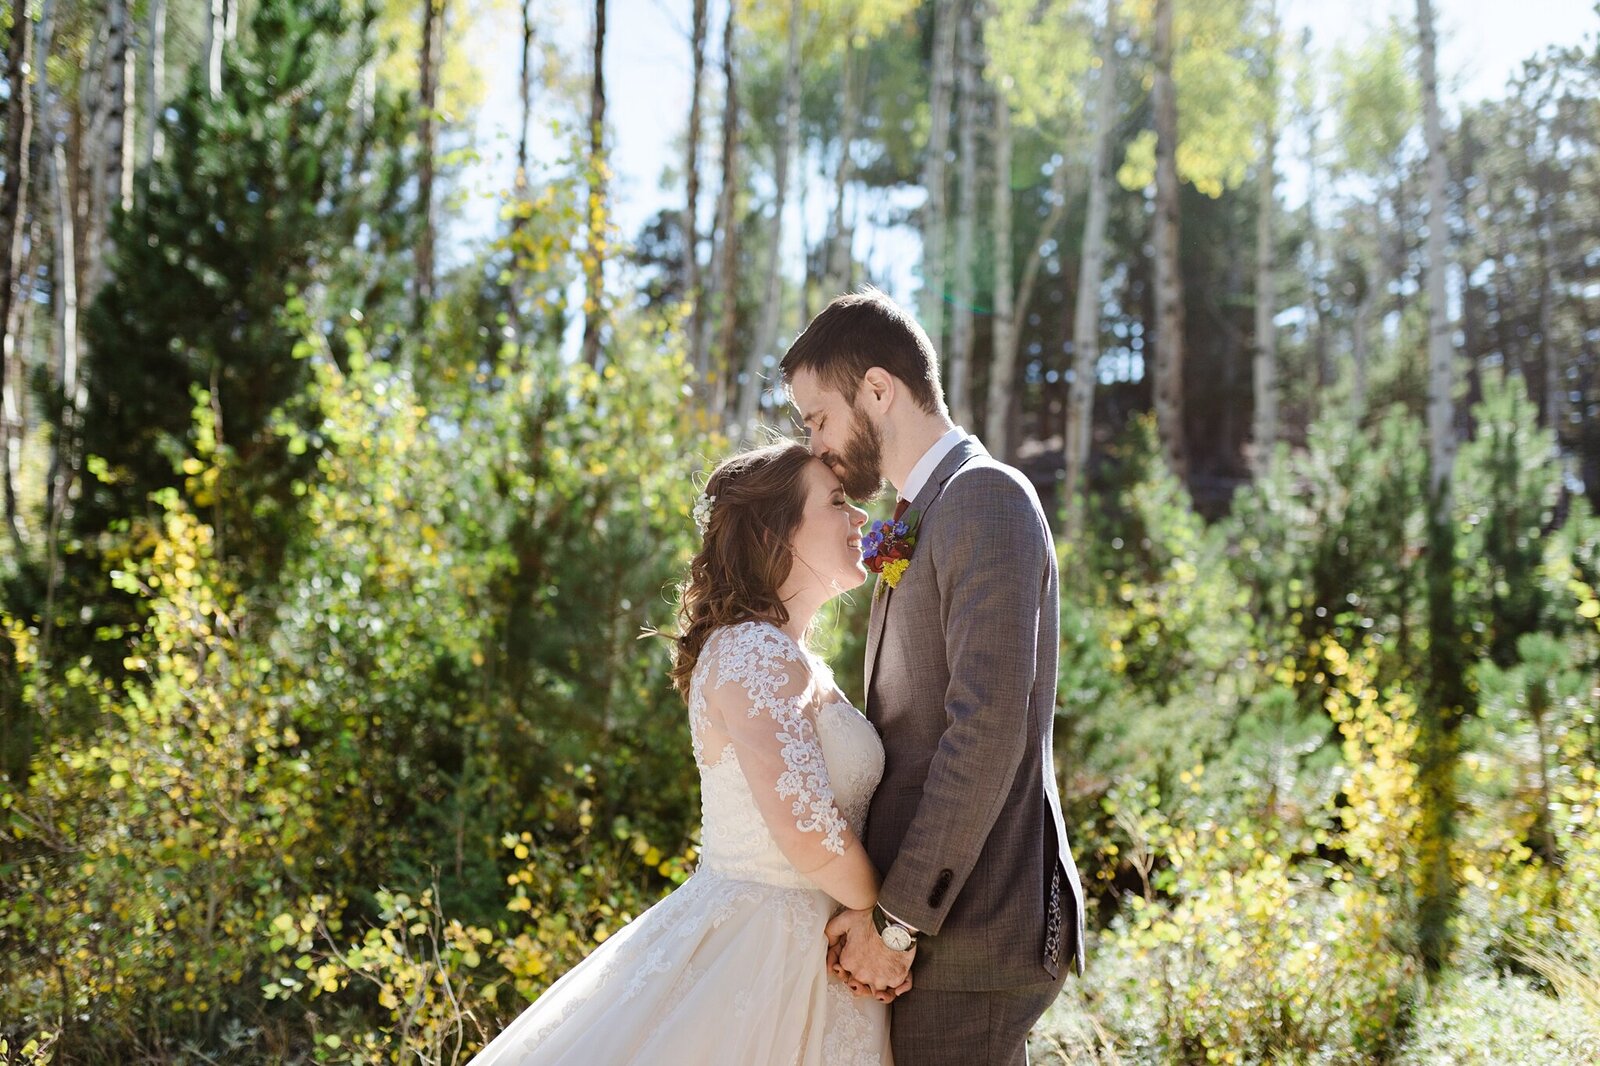 A couple on their wedding day stands in front of aspen trees in Colorado. The bride is smiling, the groom is giving her a kiss on the forehead, and they are holding hands.